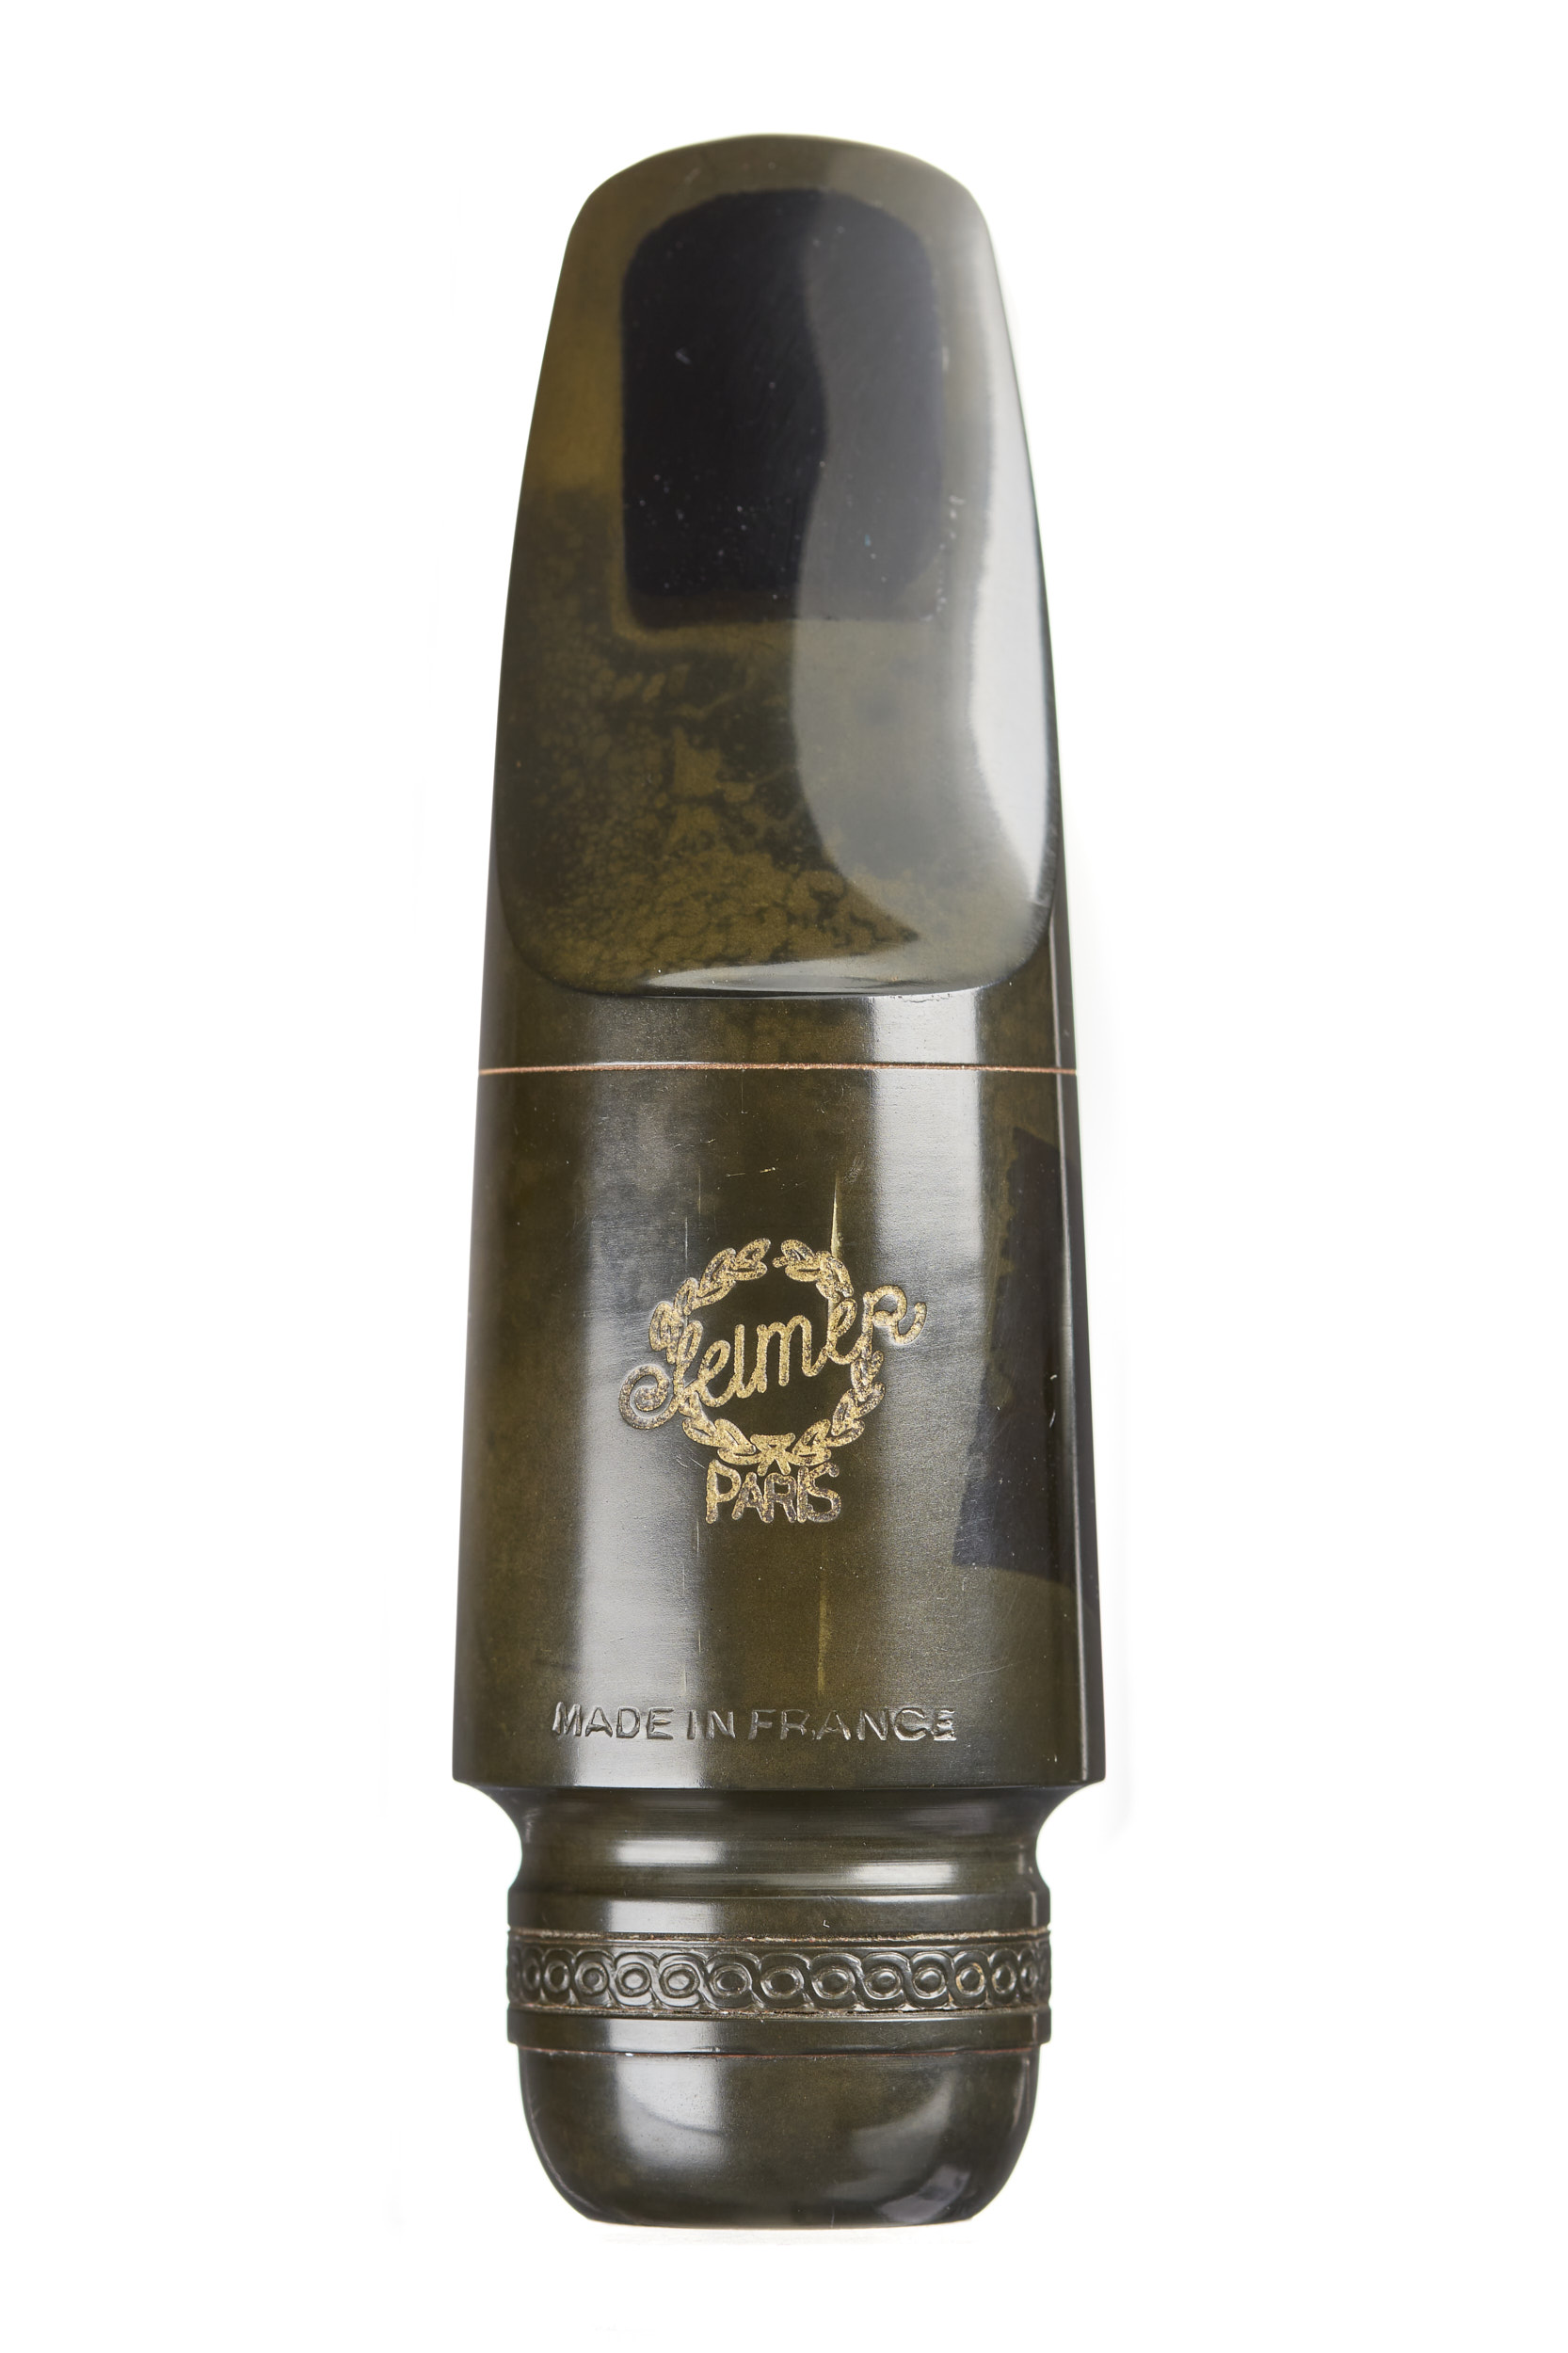 (Used) Selmer Soloist Short Shank C* Tenor Sax Mouthpiece refaced to 7* by Ed Pillinger